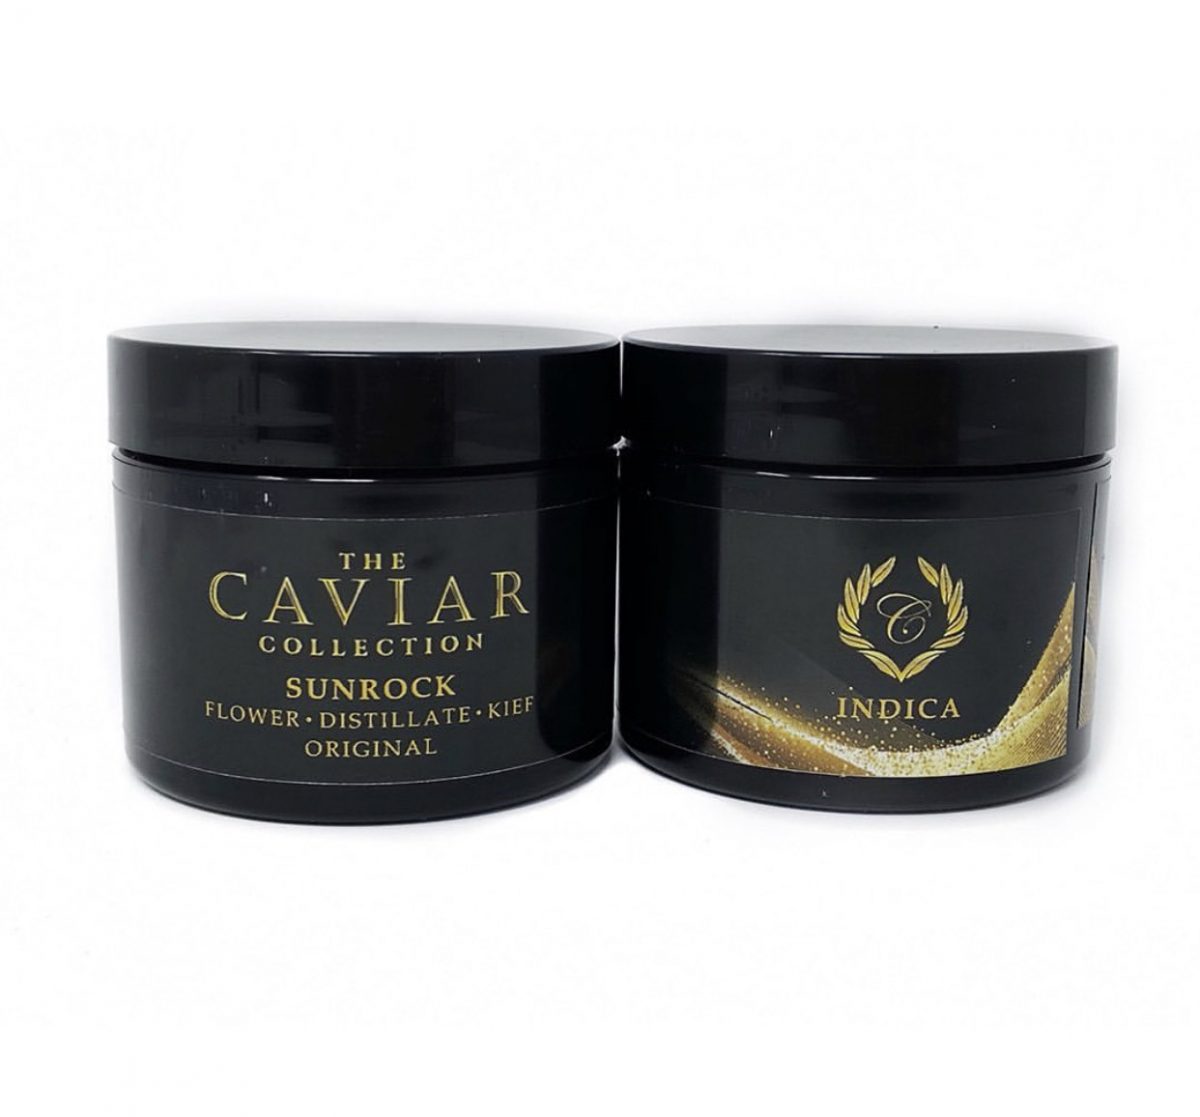 Buy Original Sunrock by The Caviar Collection